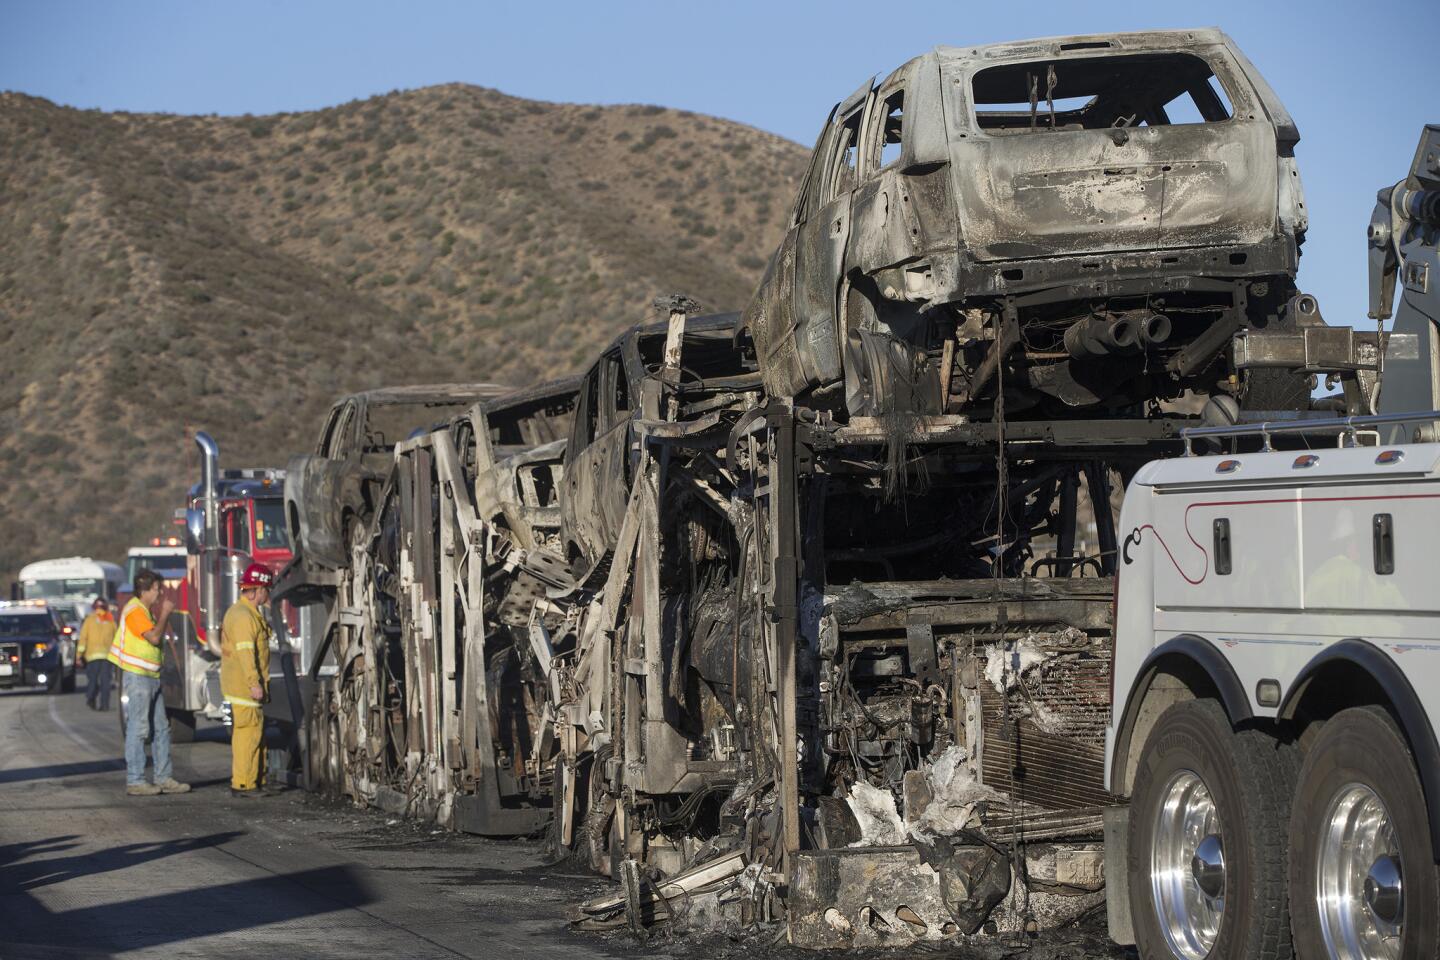 Burned cars sit on a car carrier after a brush fire jumped the 15 Freeway in the Cajon Pass.